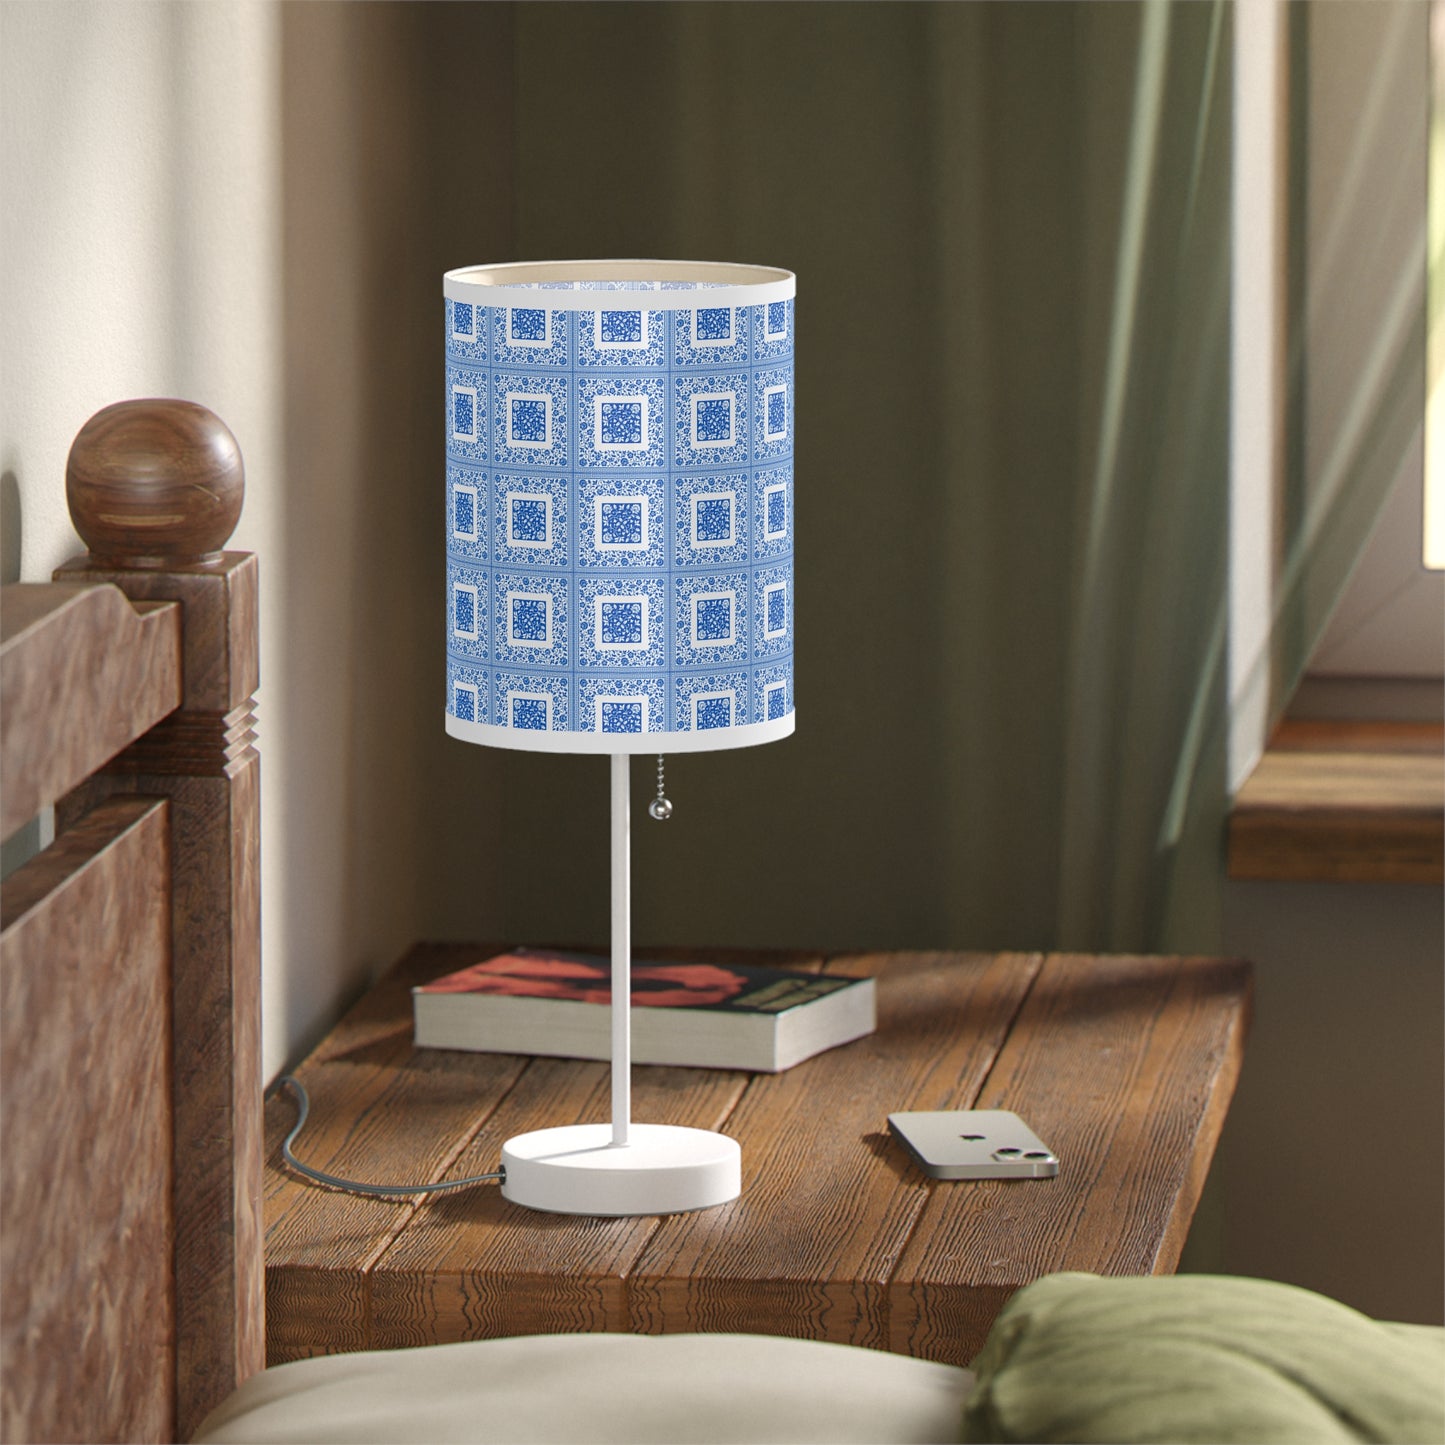 China Blue Porcelain Inspired Lamp, US|CA plug (Bulb Not Included)